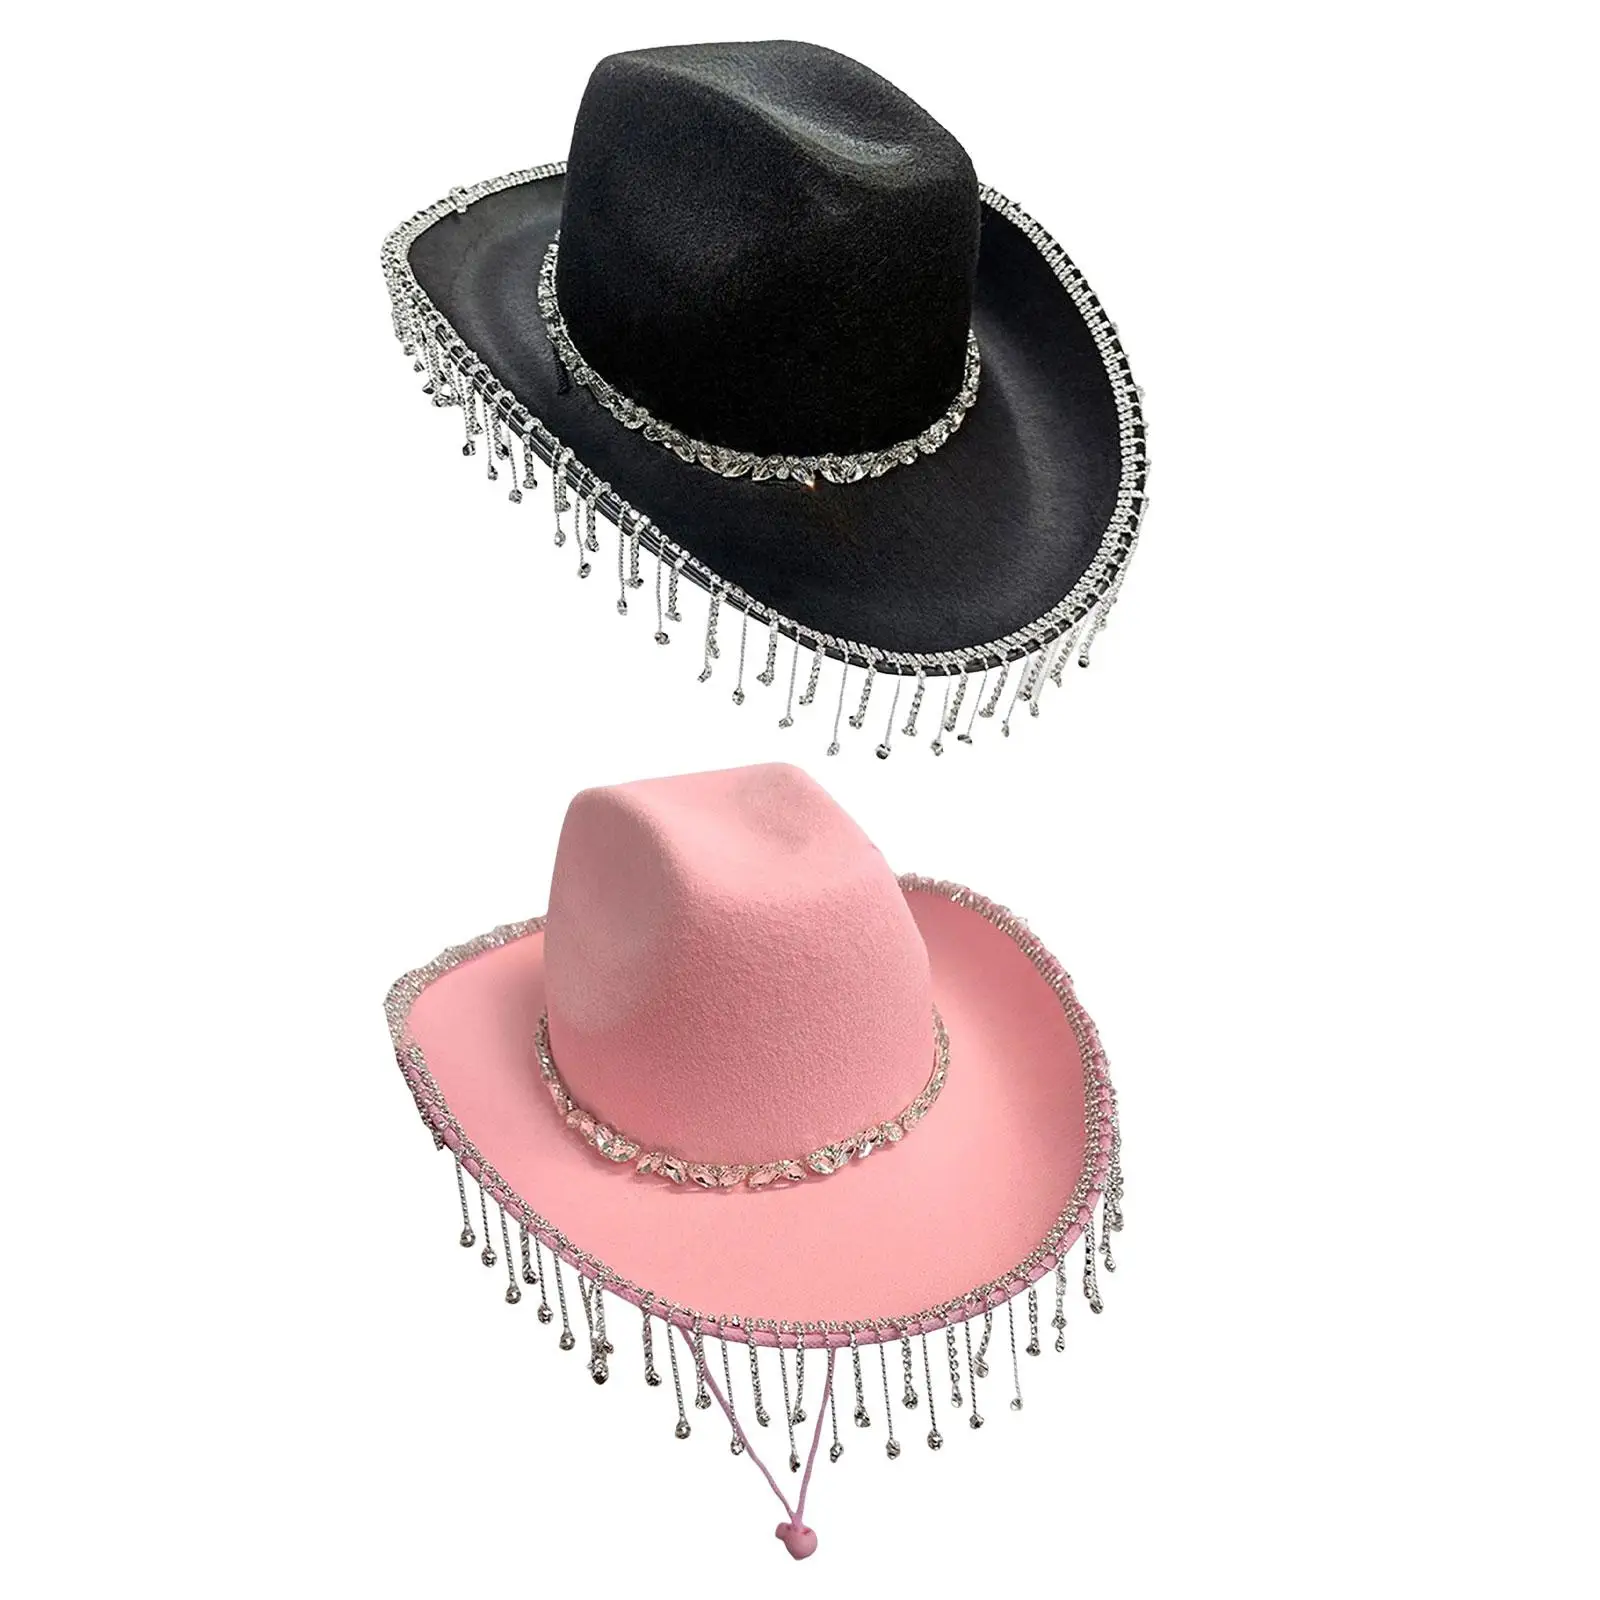 Western Cowboy Hat Beach Summer Events Hiking Party Women Camping Casual Fancy Dress Wide Brim Hat Cowgirl Hat Disco Hat